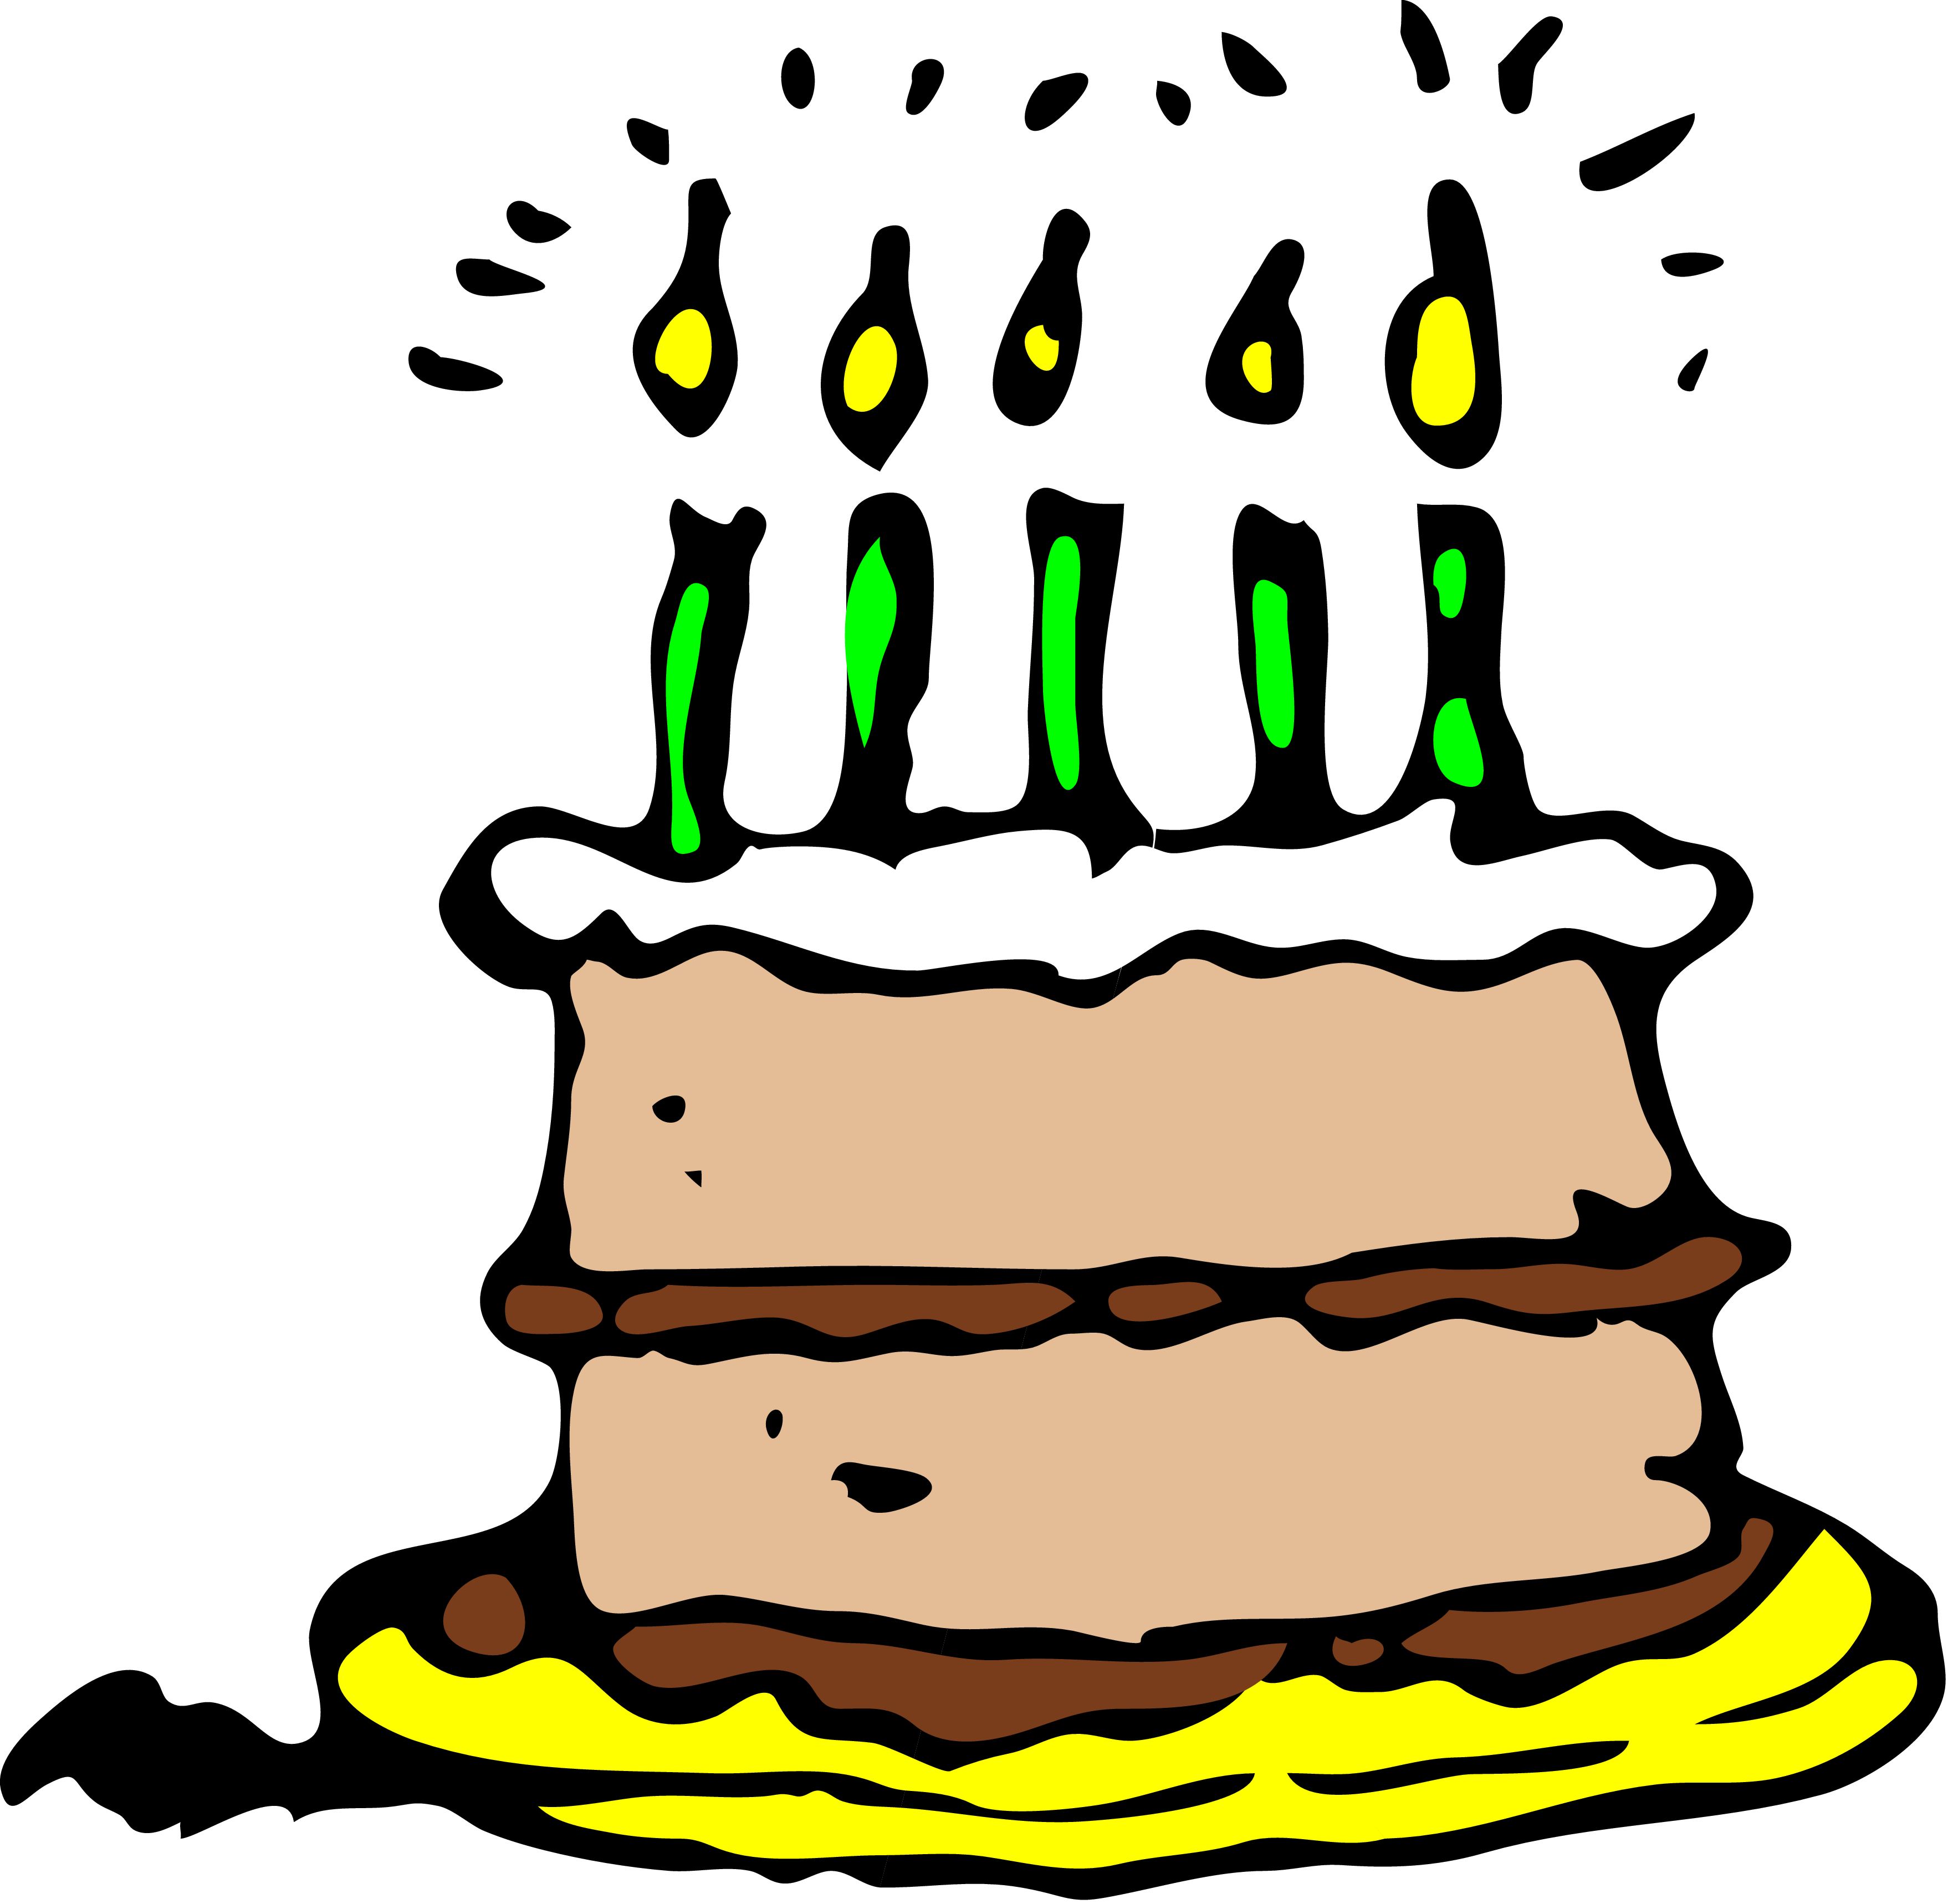 Clipart Of Birthday Cake With 66 Candles - Clipart library